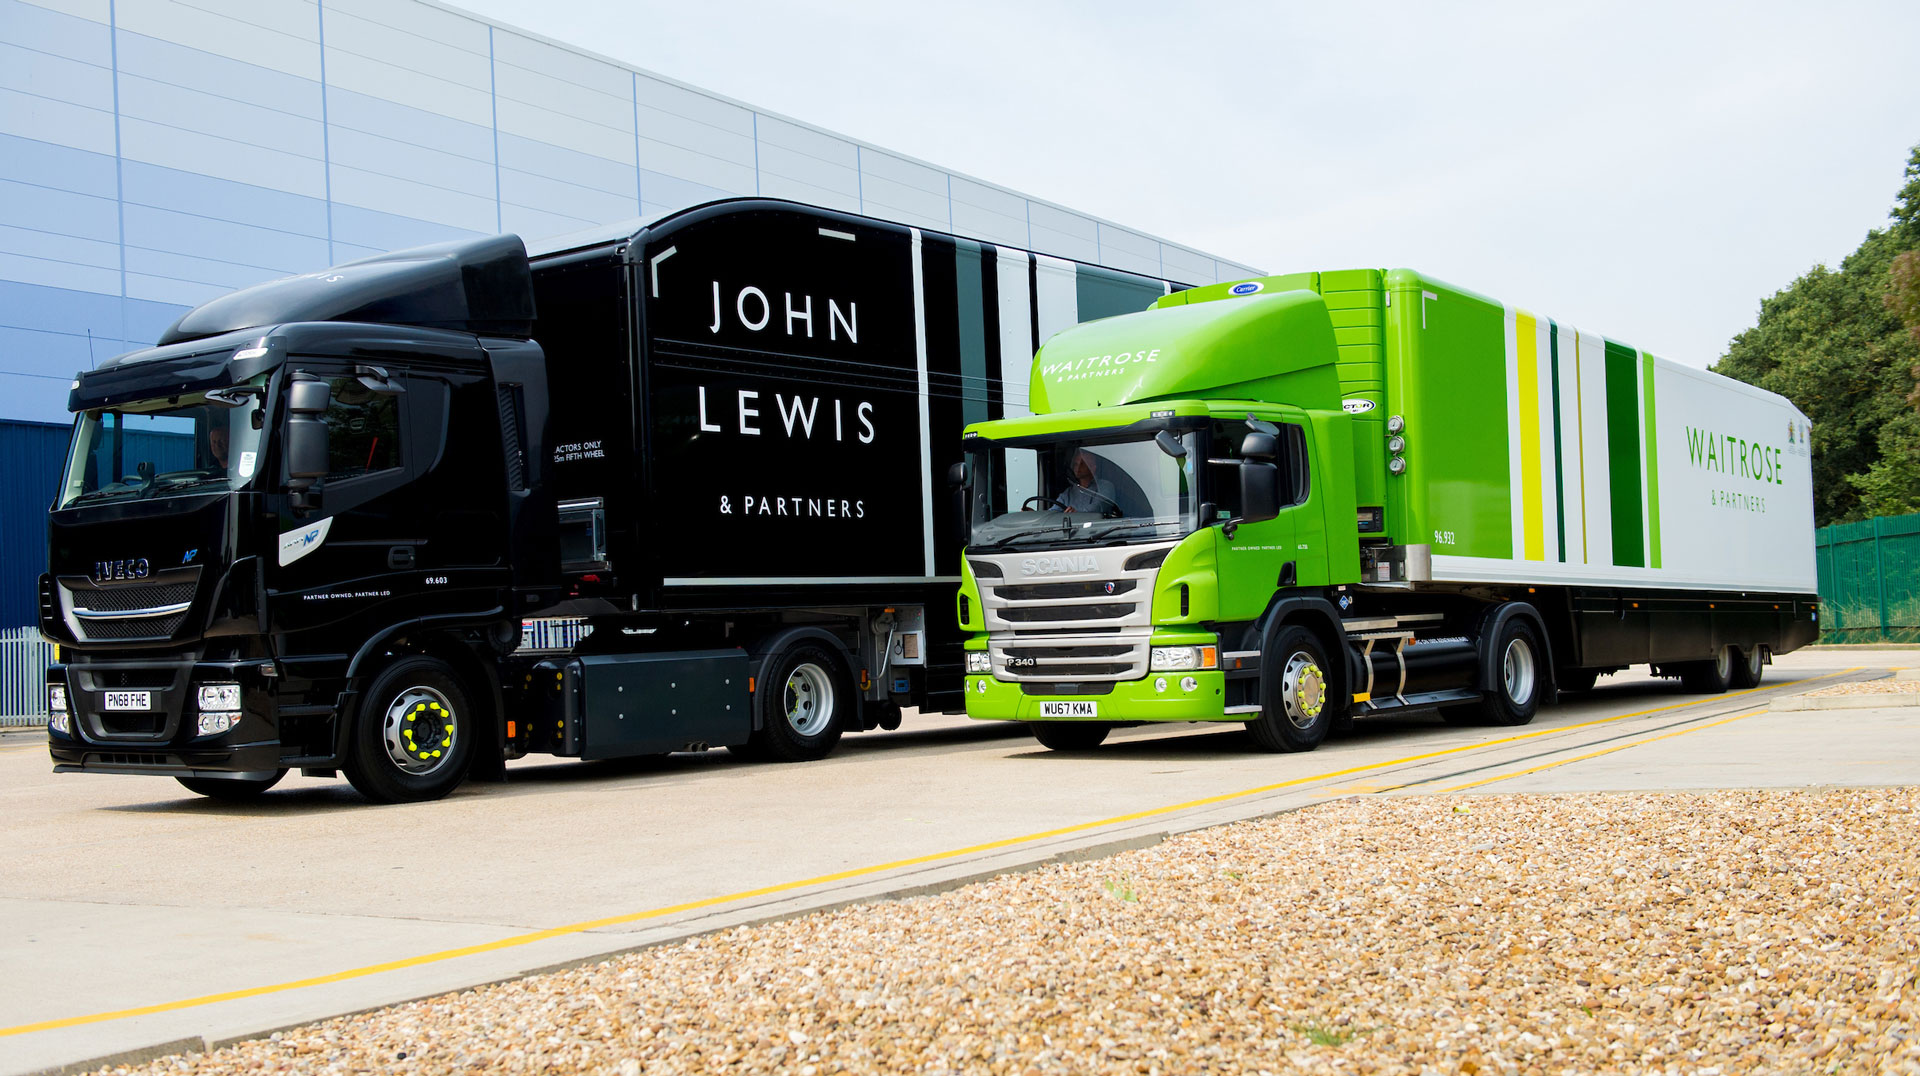 Waitrose and Partners John Lewis and Partners new branding